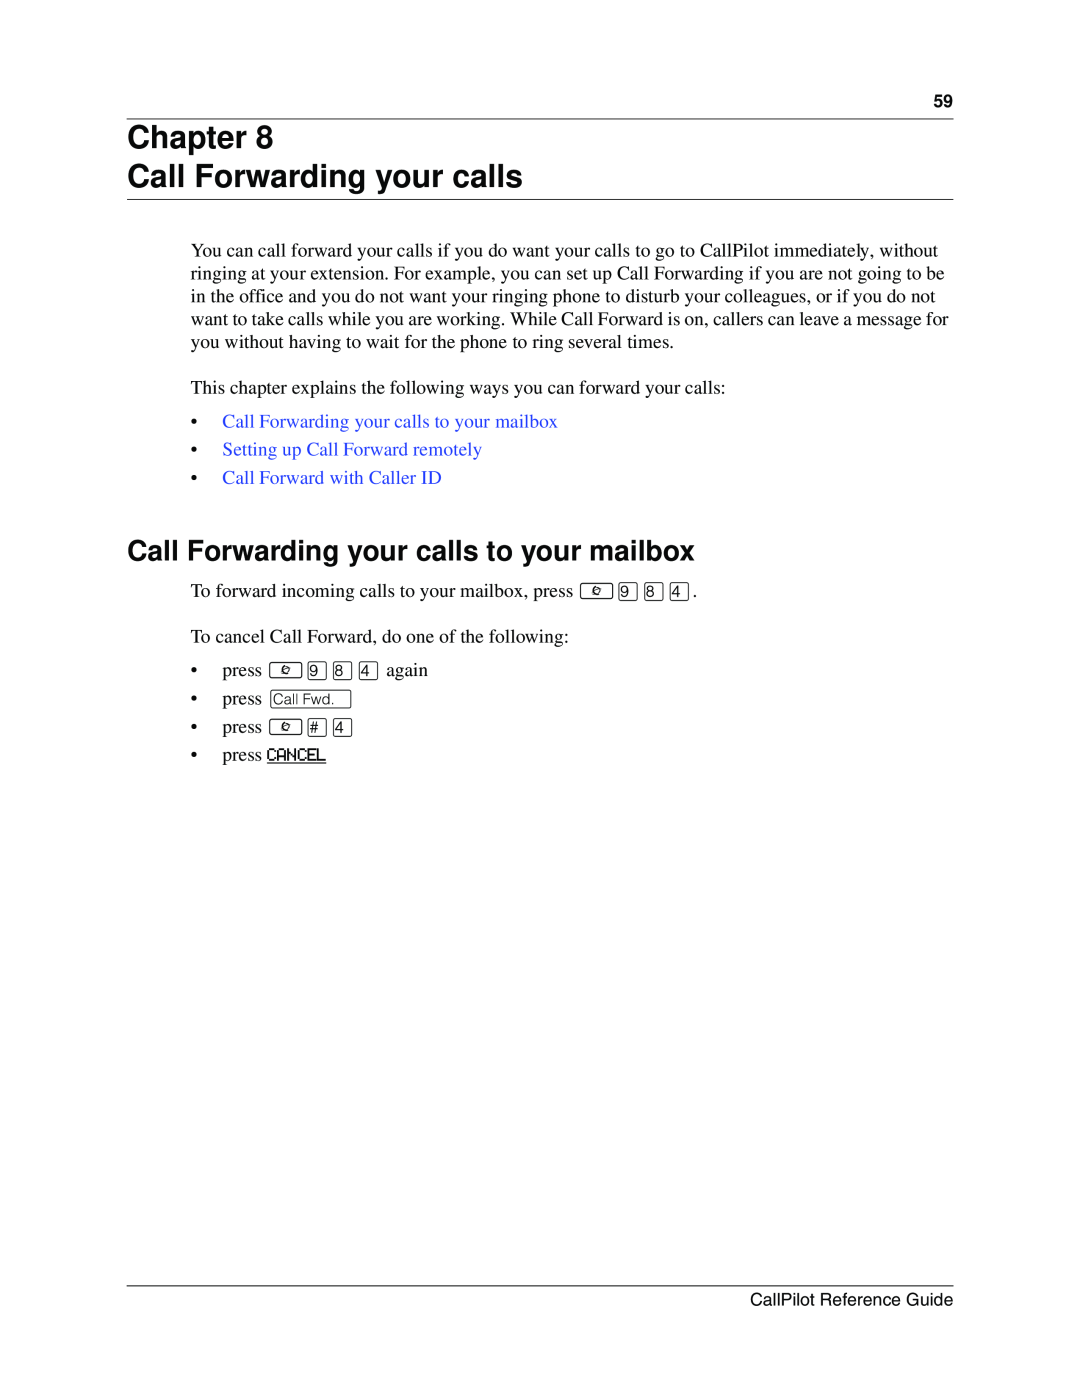 Nortel Networks CallPilot manual Chapter Call Forwarding your calls, Call Forwarding your calls to your mailbox 